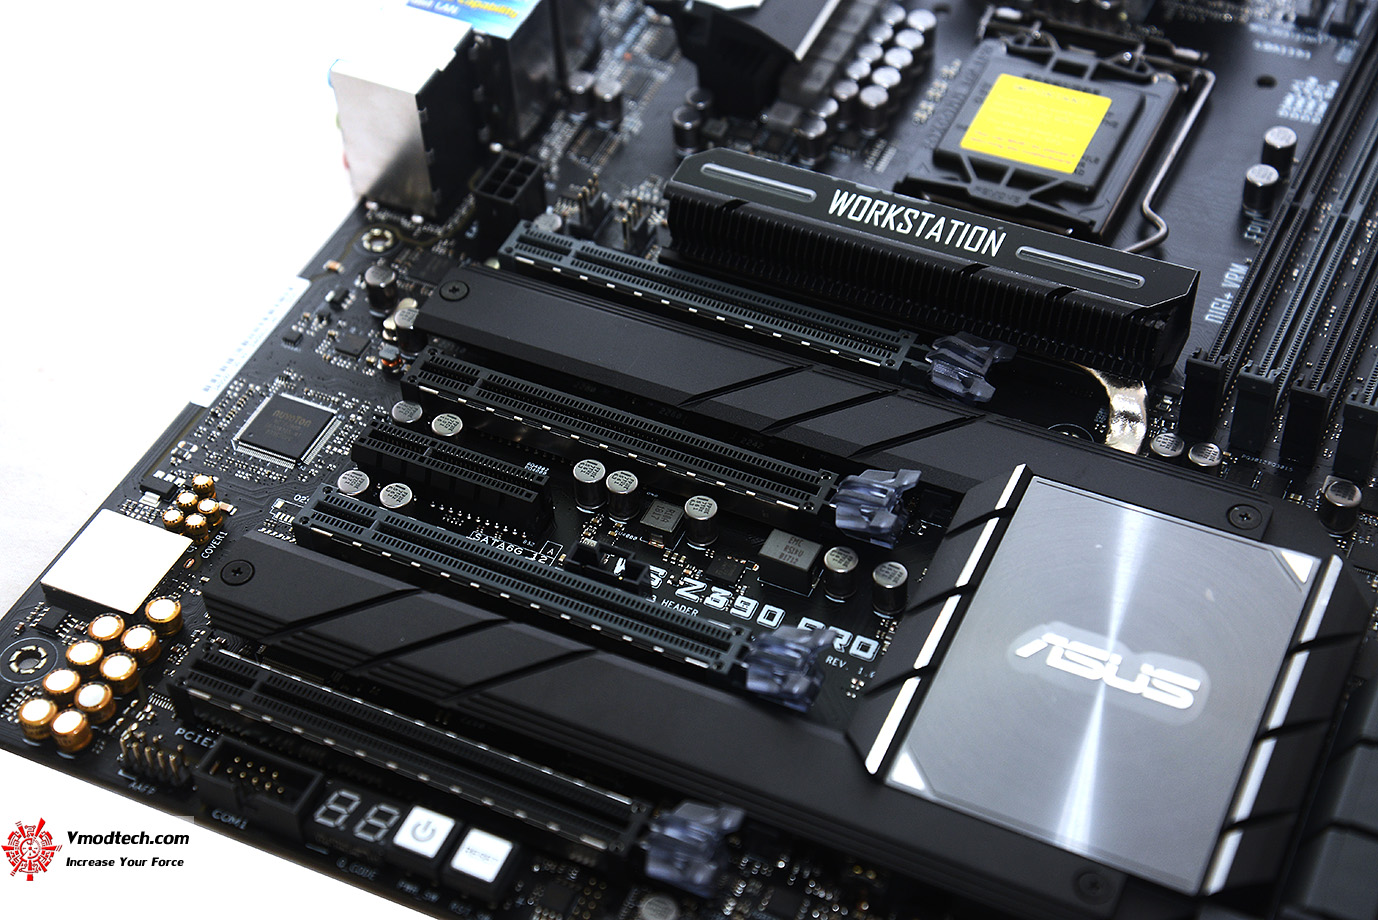 dsc 1377 ASUS WS Z390 PRO Servers & Workstations Motherboard Review